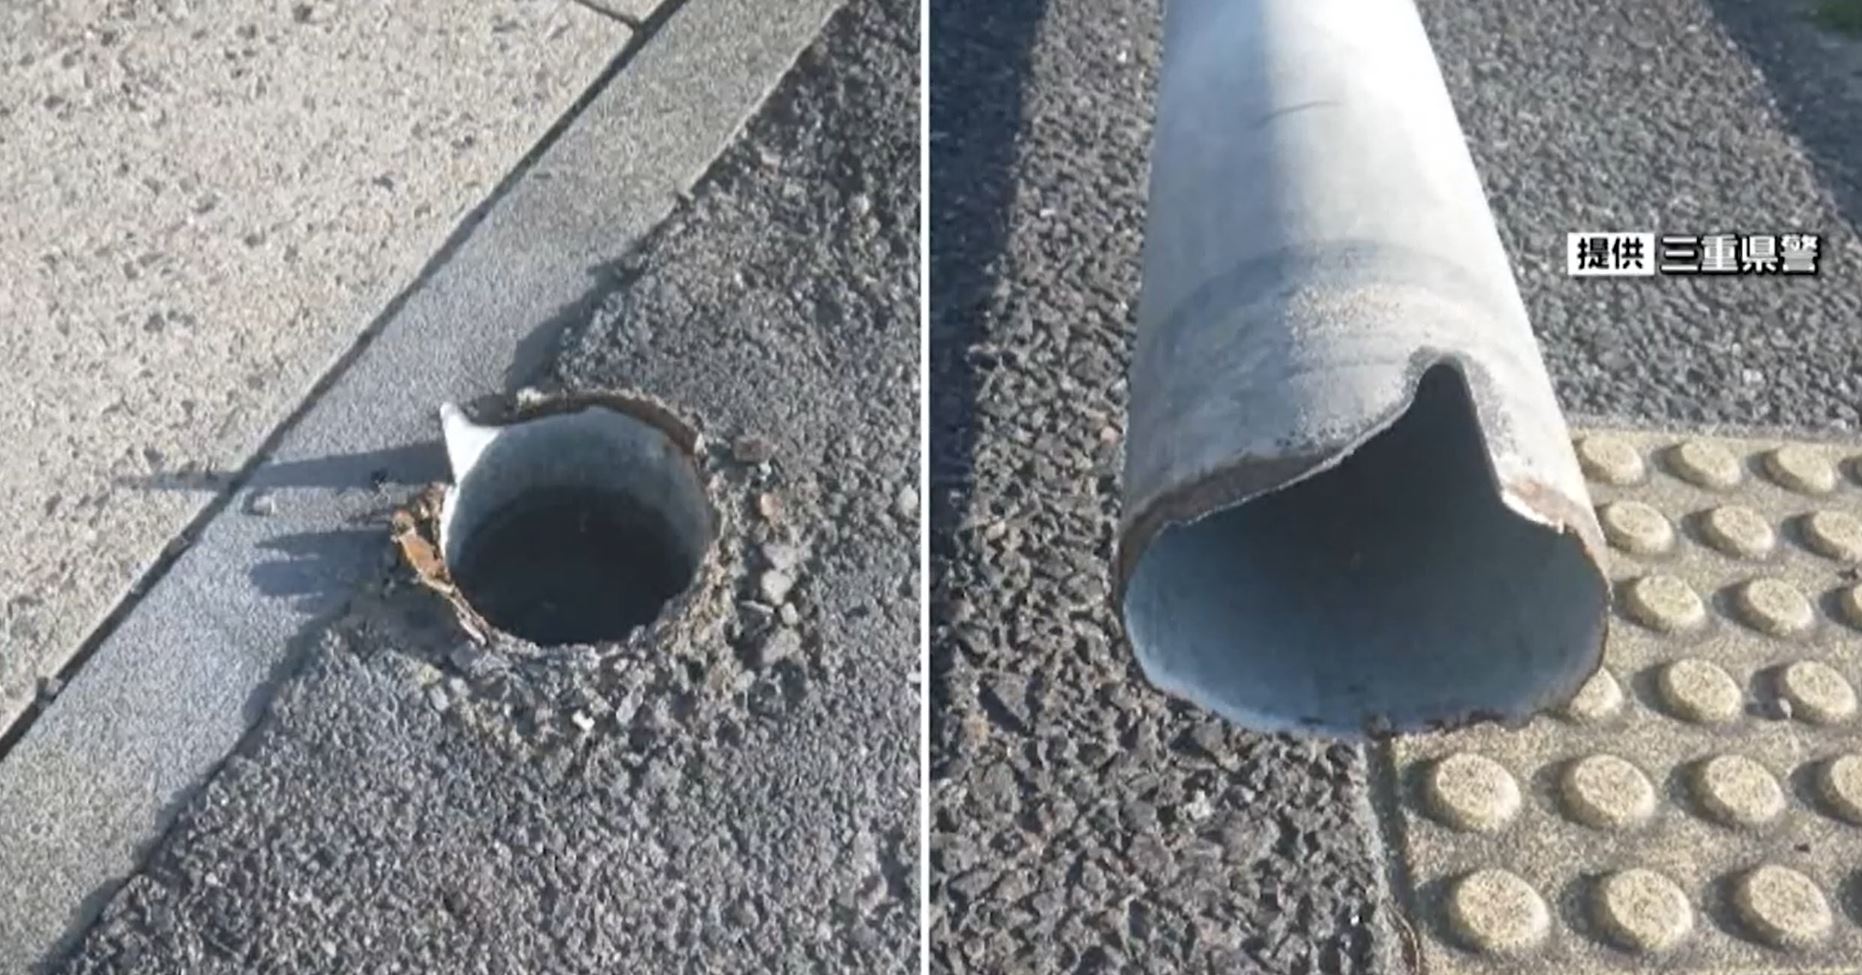 Dog Pee Caused a Traffic Pole to Snap in Japan — and It's Not the
First Time